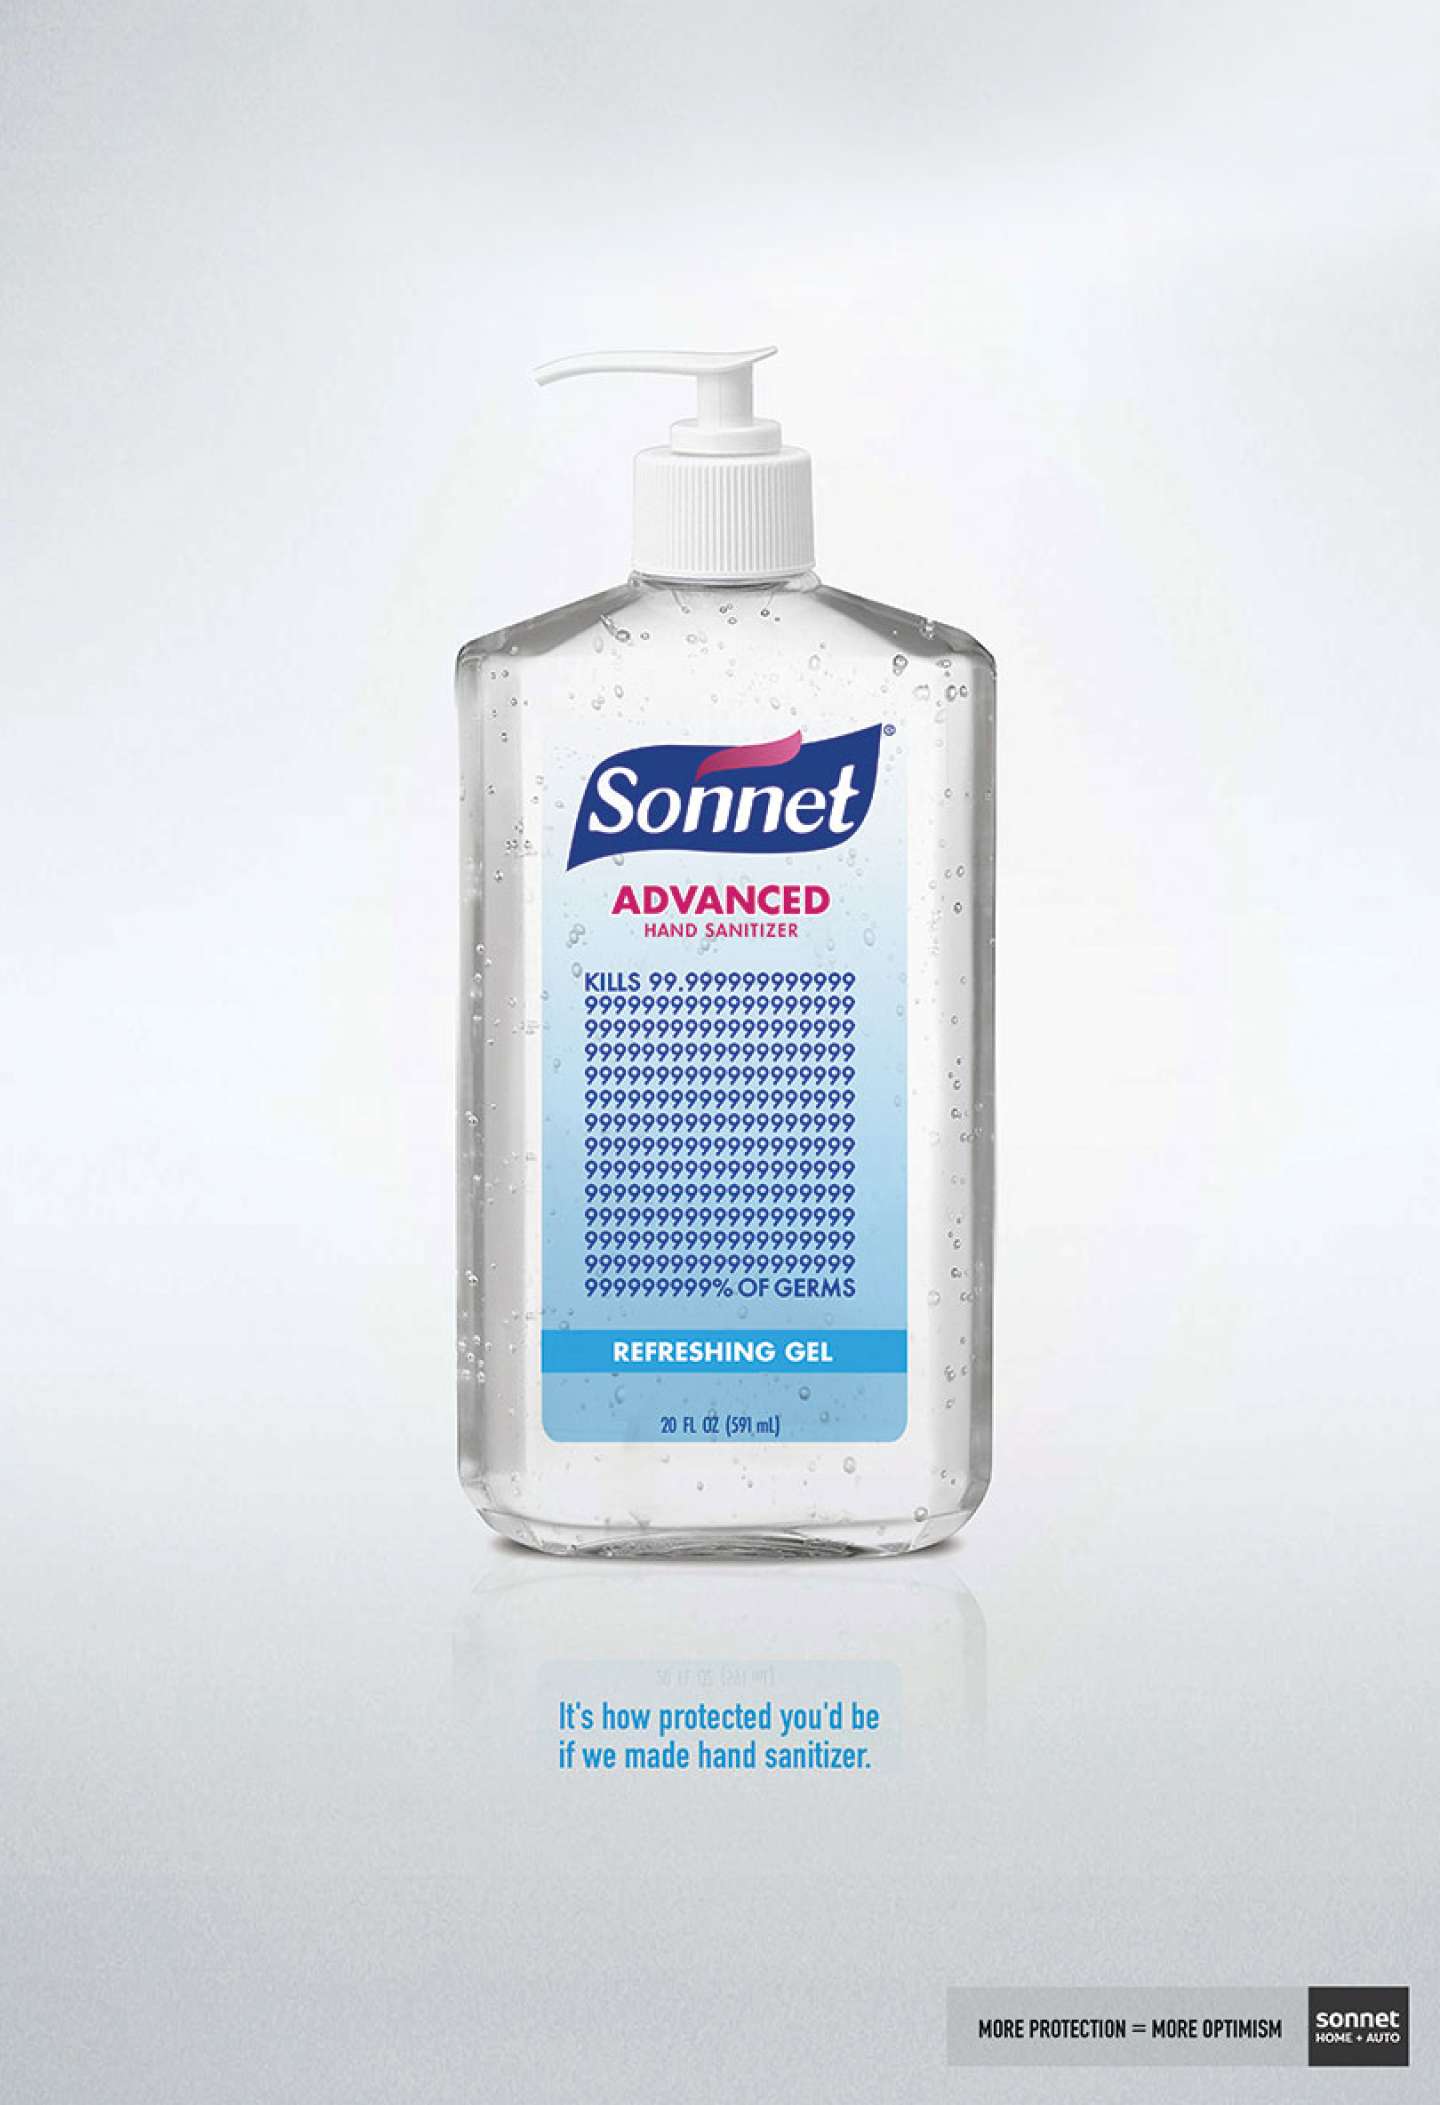 Sonnet Products